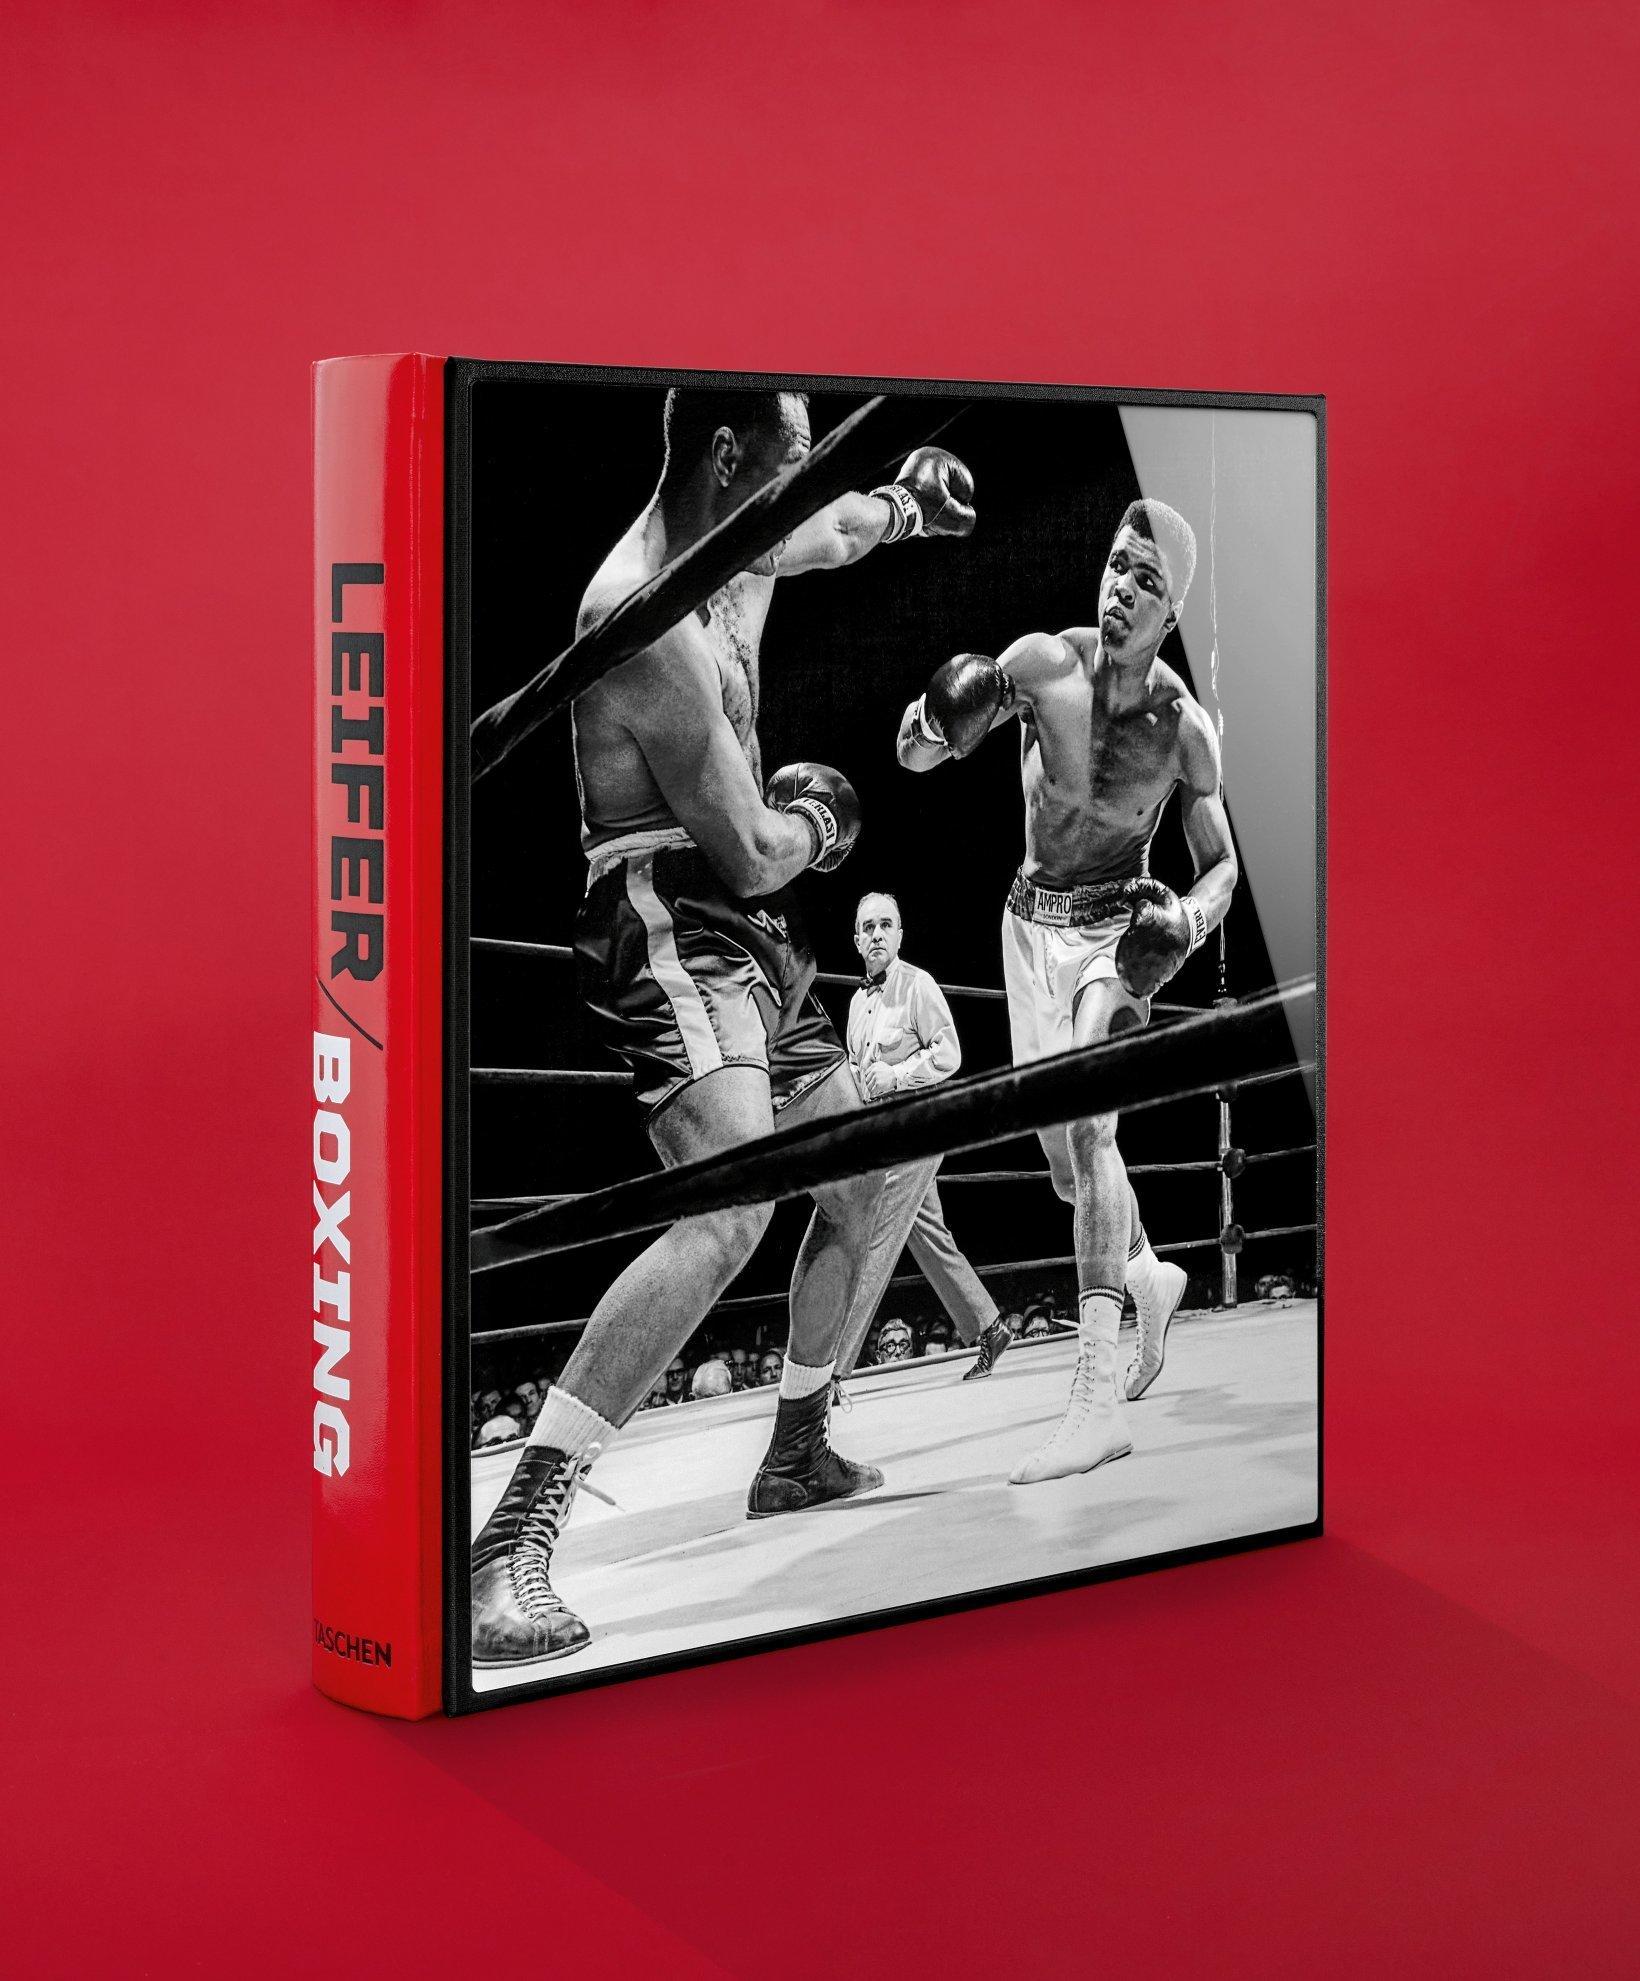 Collector’s Edition of 1,000 numbered copies, each signed by Neil Leifer.
ChromaLuxe aluminum hardcover in slipcase, 14.2 x 15.2 in., 24.84 lb, 424 pages.

Neil Leifer has shot almost every important boxing match for the last 60 years, from the